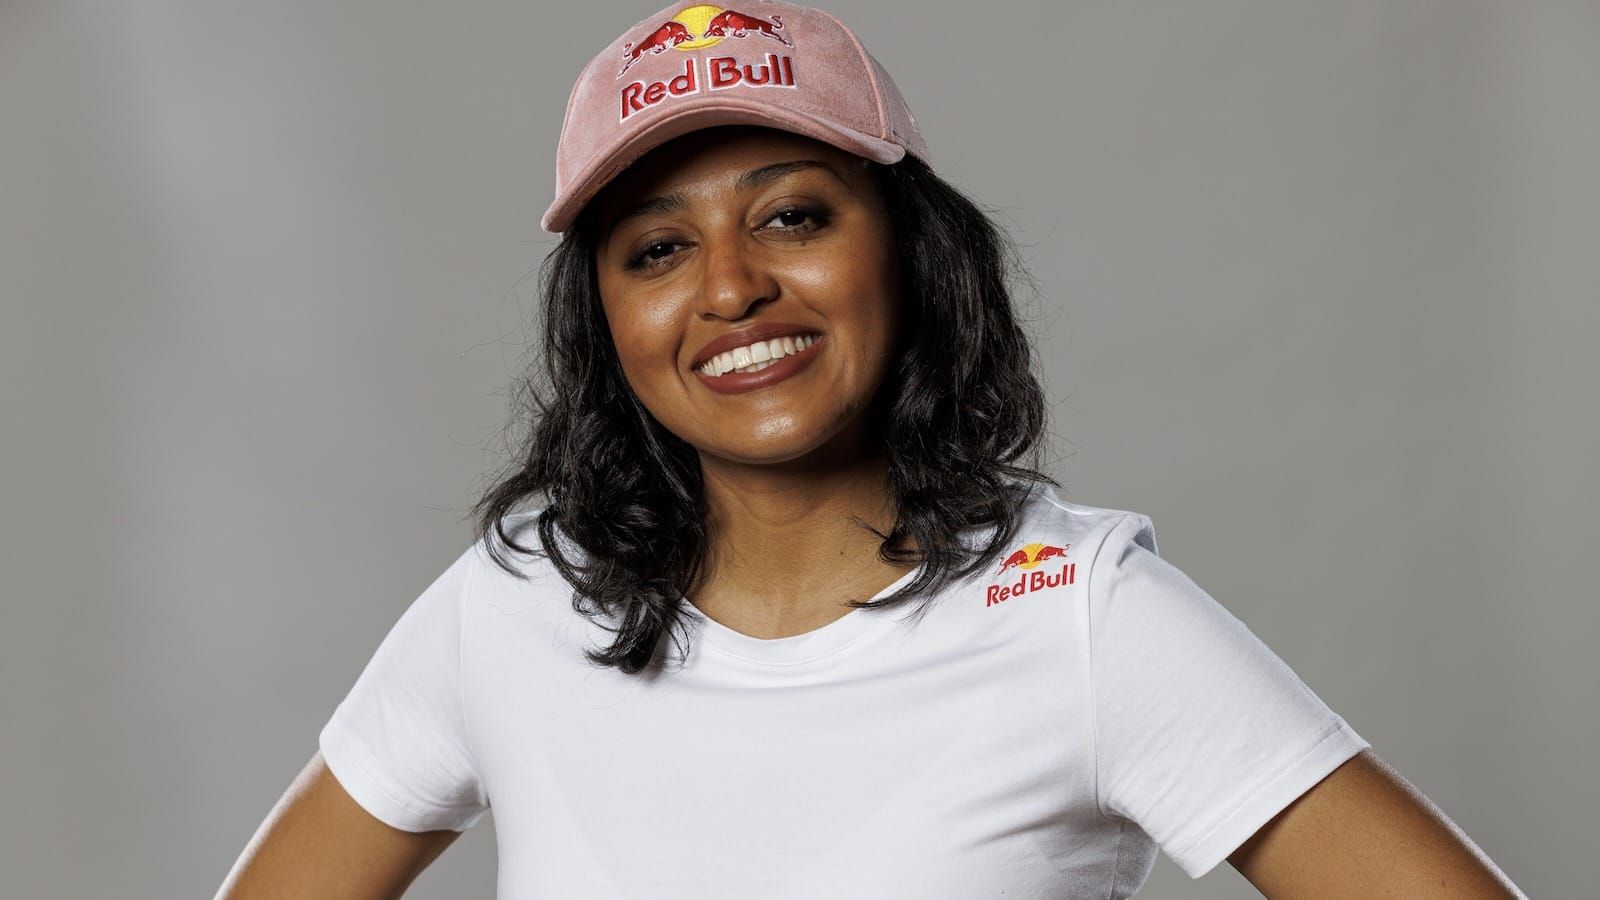 Headshot photo of Tekken player Cuddle_Core who is smiling and wearing a white t-shirt and Red Bull hat